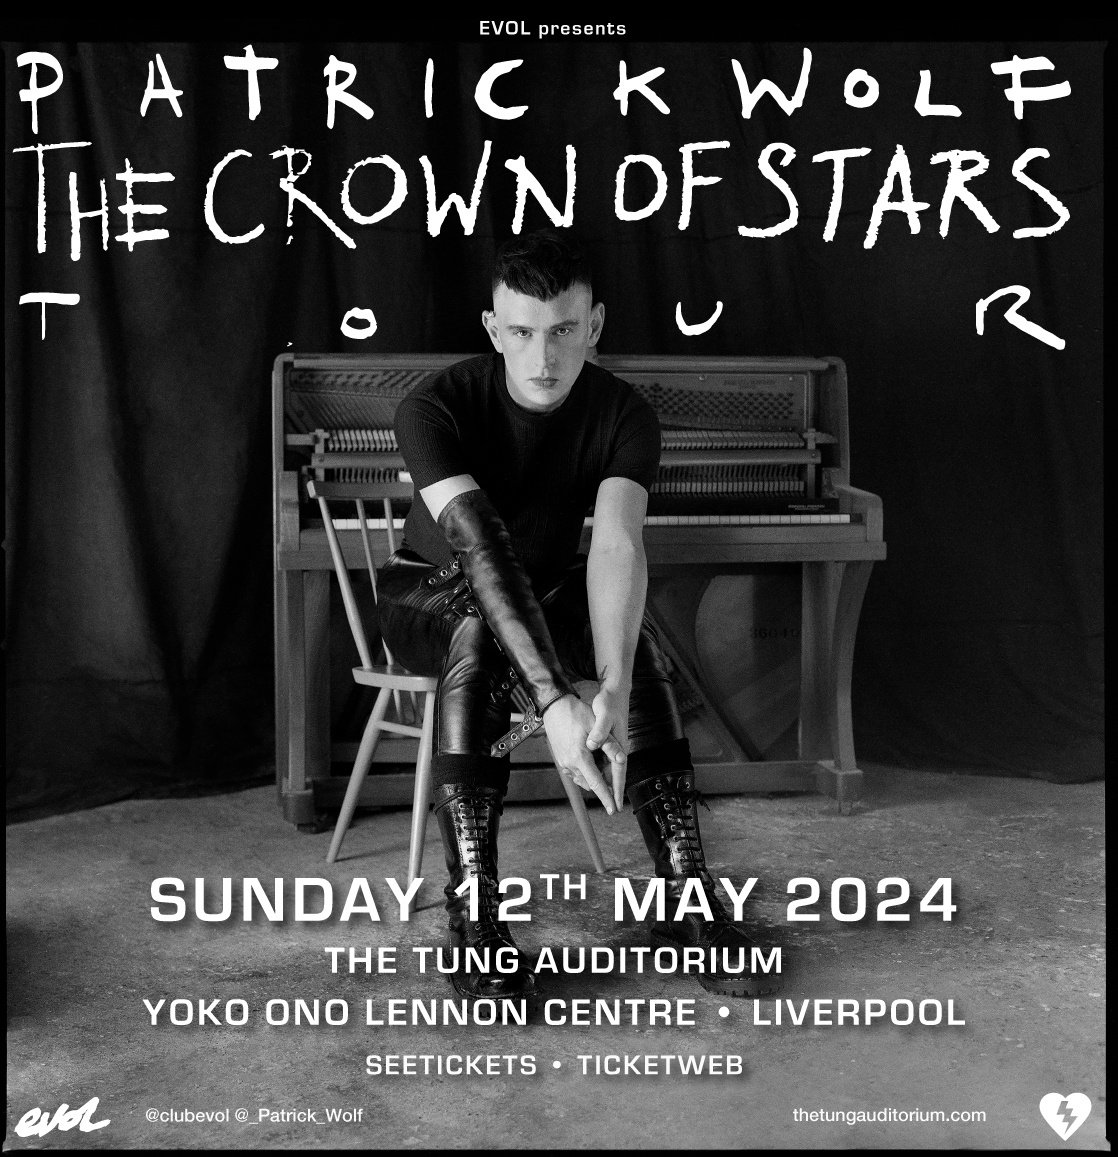 A truly unique, personal and engaging live experience. Discover masterful artiste @_PATRICK_WOLF and see 𝐓𝐇𝐄 𝐎𝐍𝐋𝐘 𝐔𝐊 𝐒𝐇𝐎𝐖 𝐎𝐅 𝟐𝟎𝟐𝟒, Sunday May 12th at Liverpool's @TungAuditorium. Get tickets: seetickets.com/event/patrick-… 📸 opening night of tour in 🇳🇱 by cranky_ola